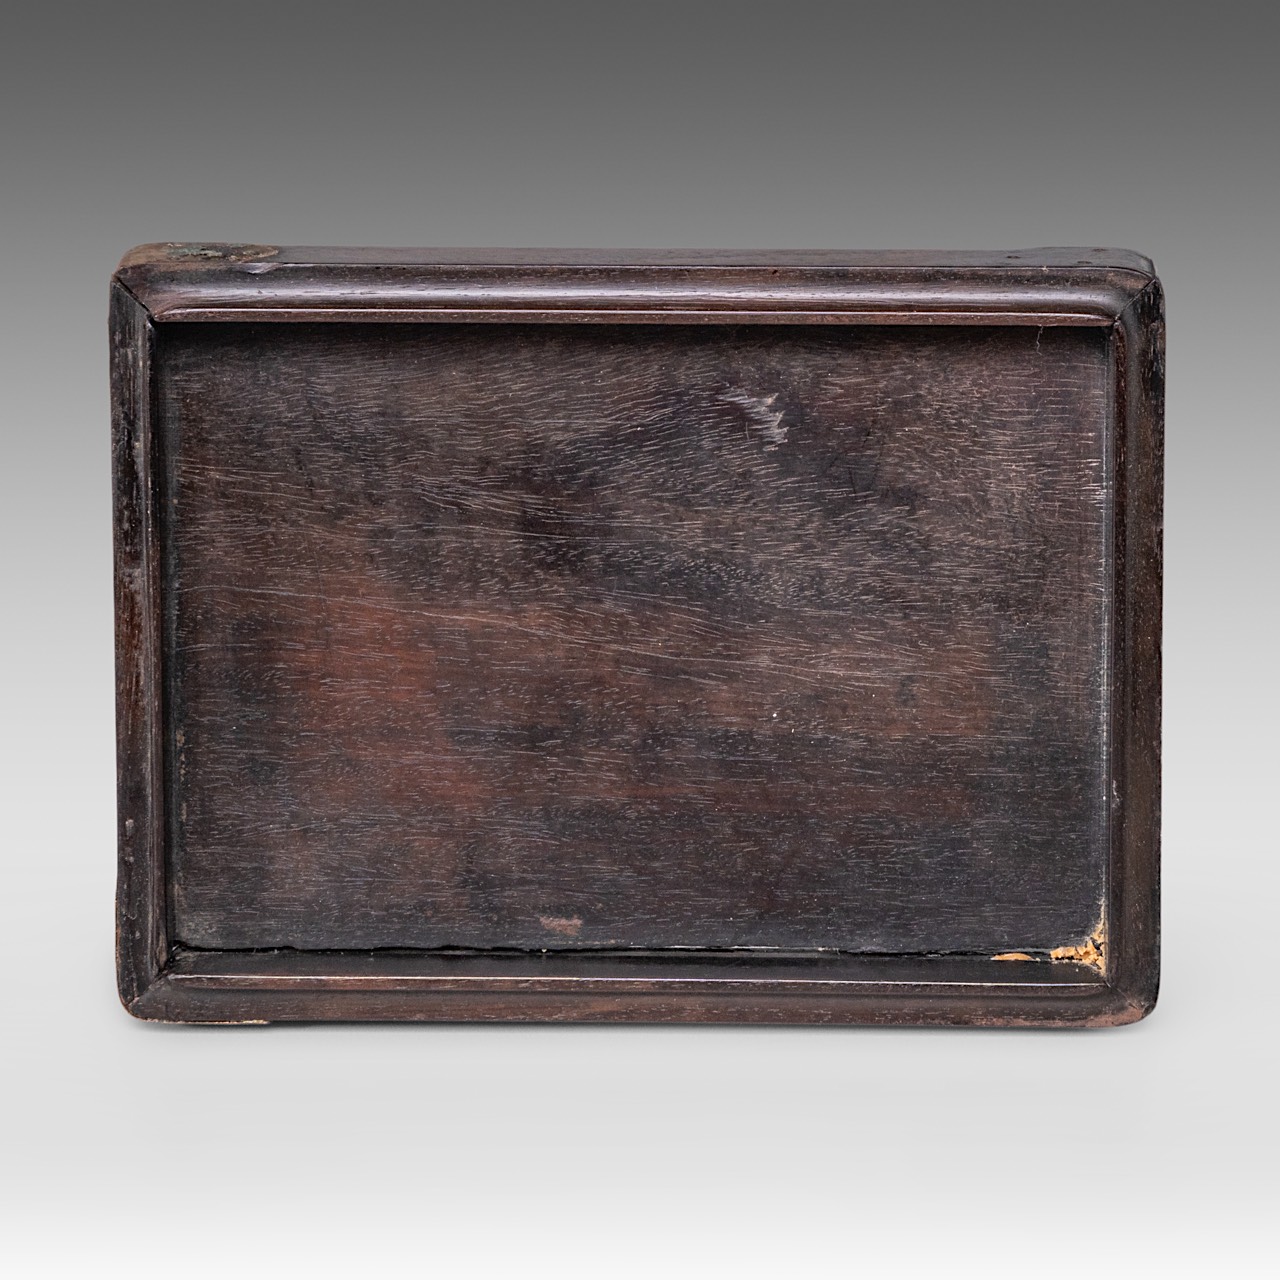 A Chinese hardwood box and cover, presumably zitan wood, late Qing, 18 x 13,5 - H 5 cm - Image 9 of 10